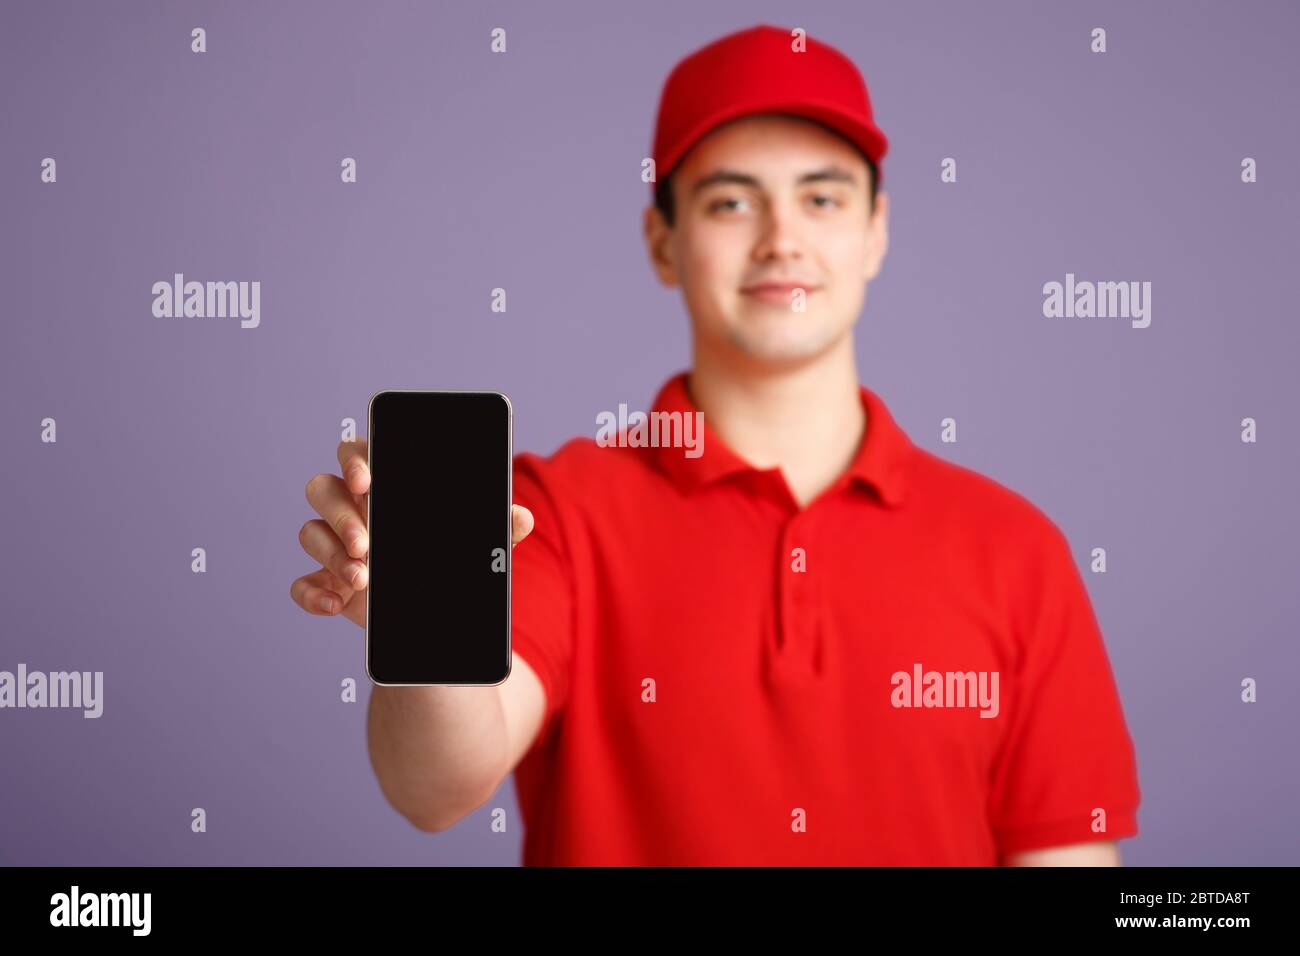 Save time on delivery. Friendly courier in uniform shows smartphone with blank screen Stock Photo